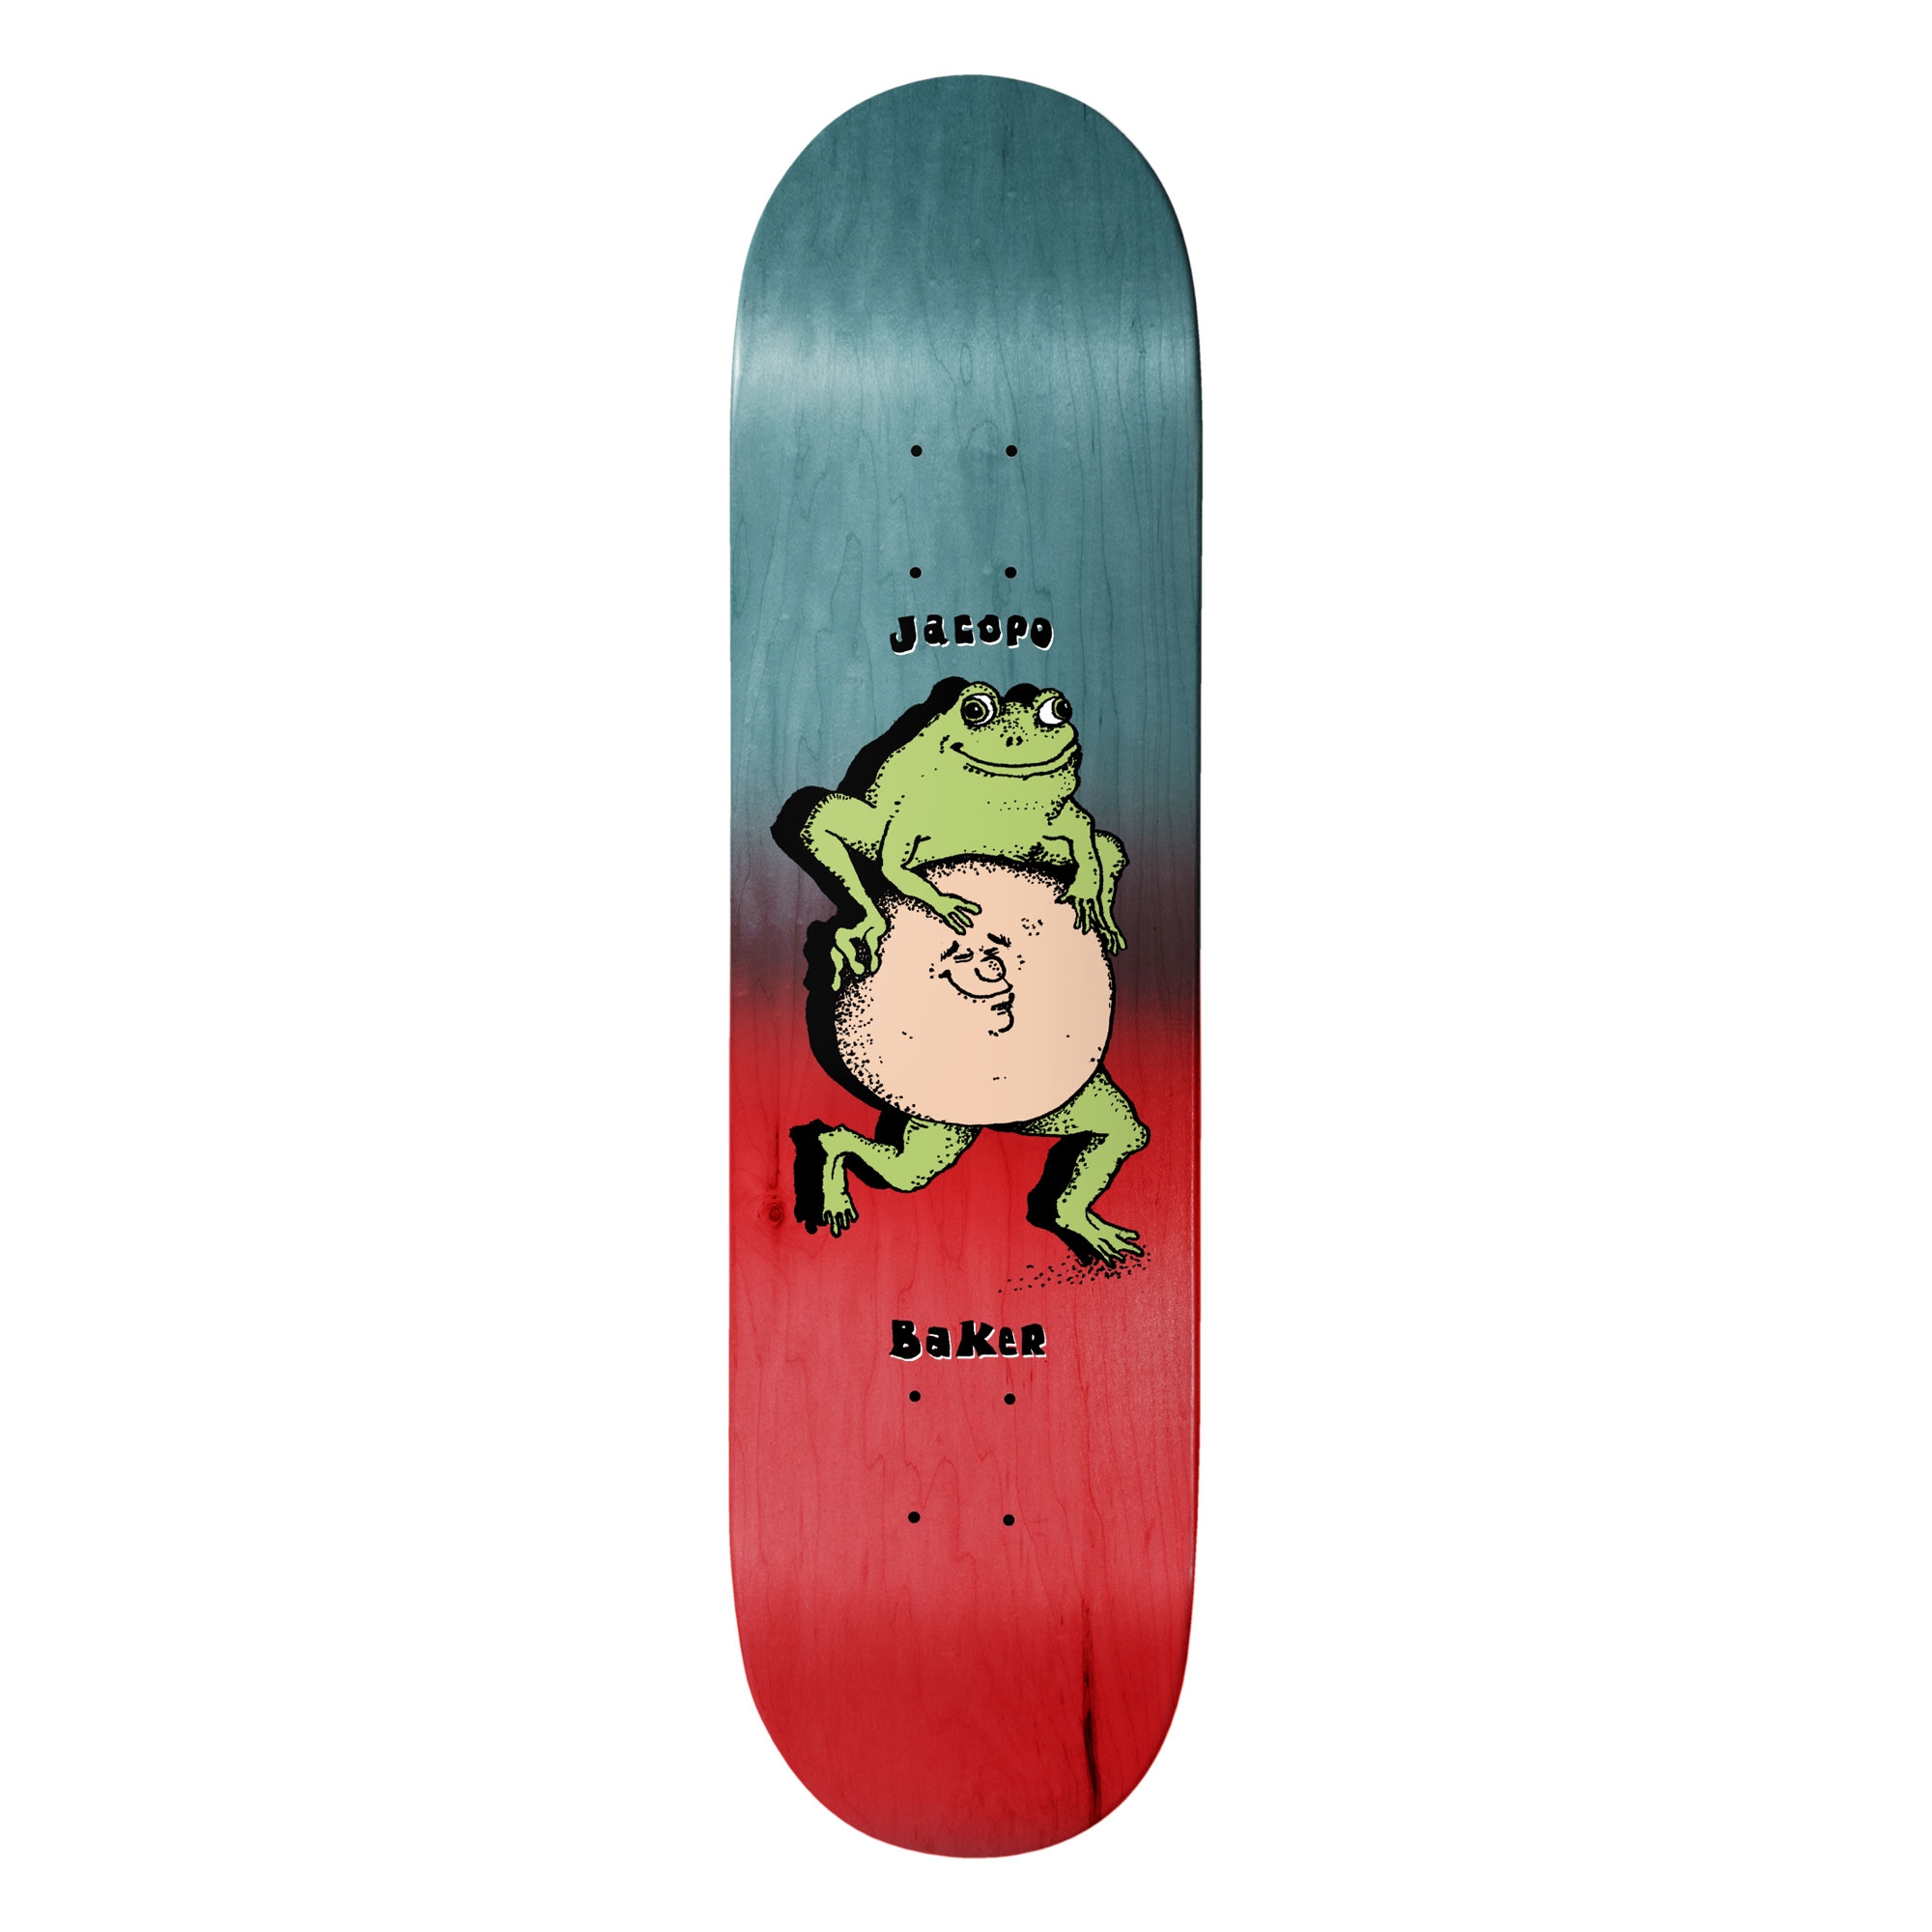 BAKER Deck LATE FOR SOMETHING JC 8.25, red/blue 8.2''